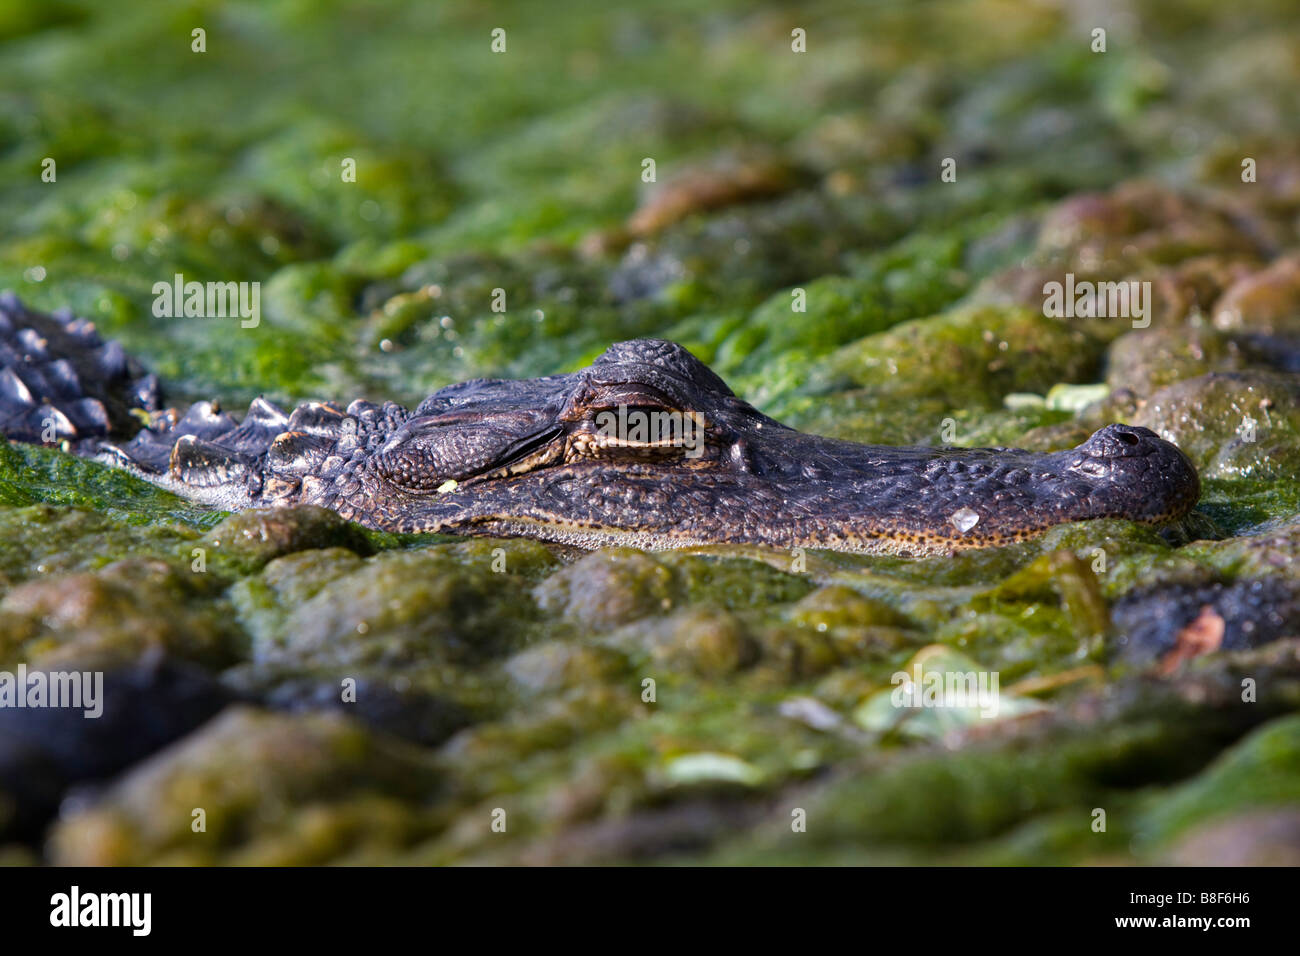 Alligator looking closely at a photographer before the park rangers can capture him. Florida swamp. Stock Photo